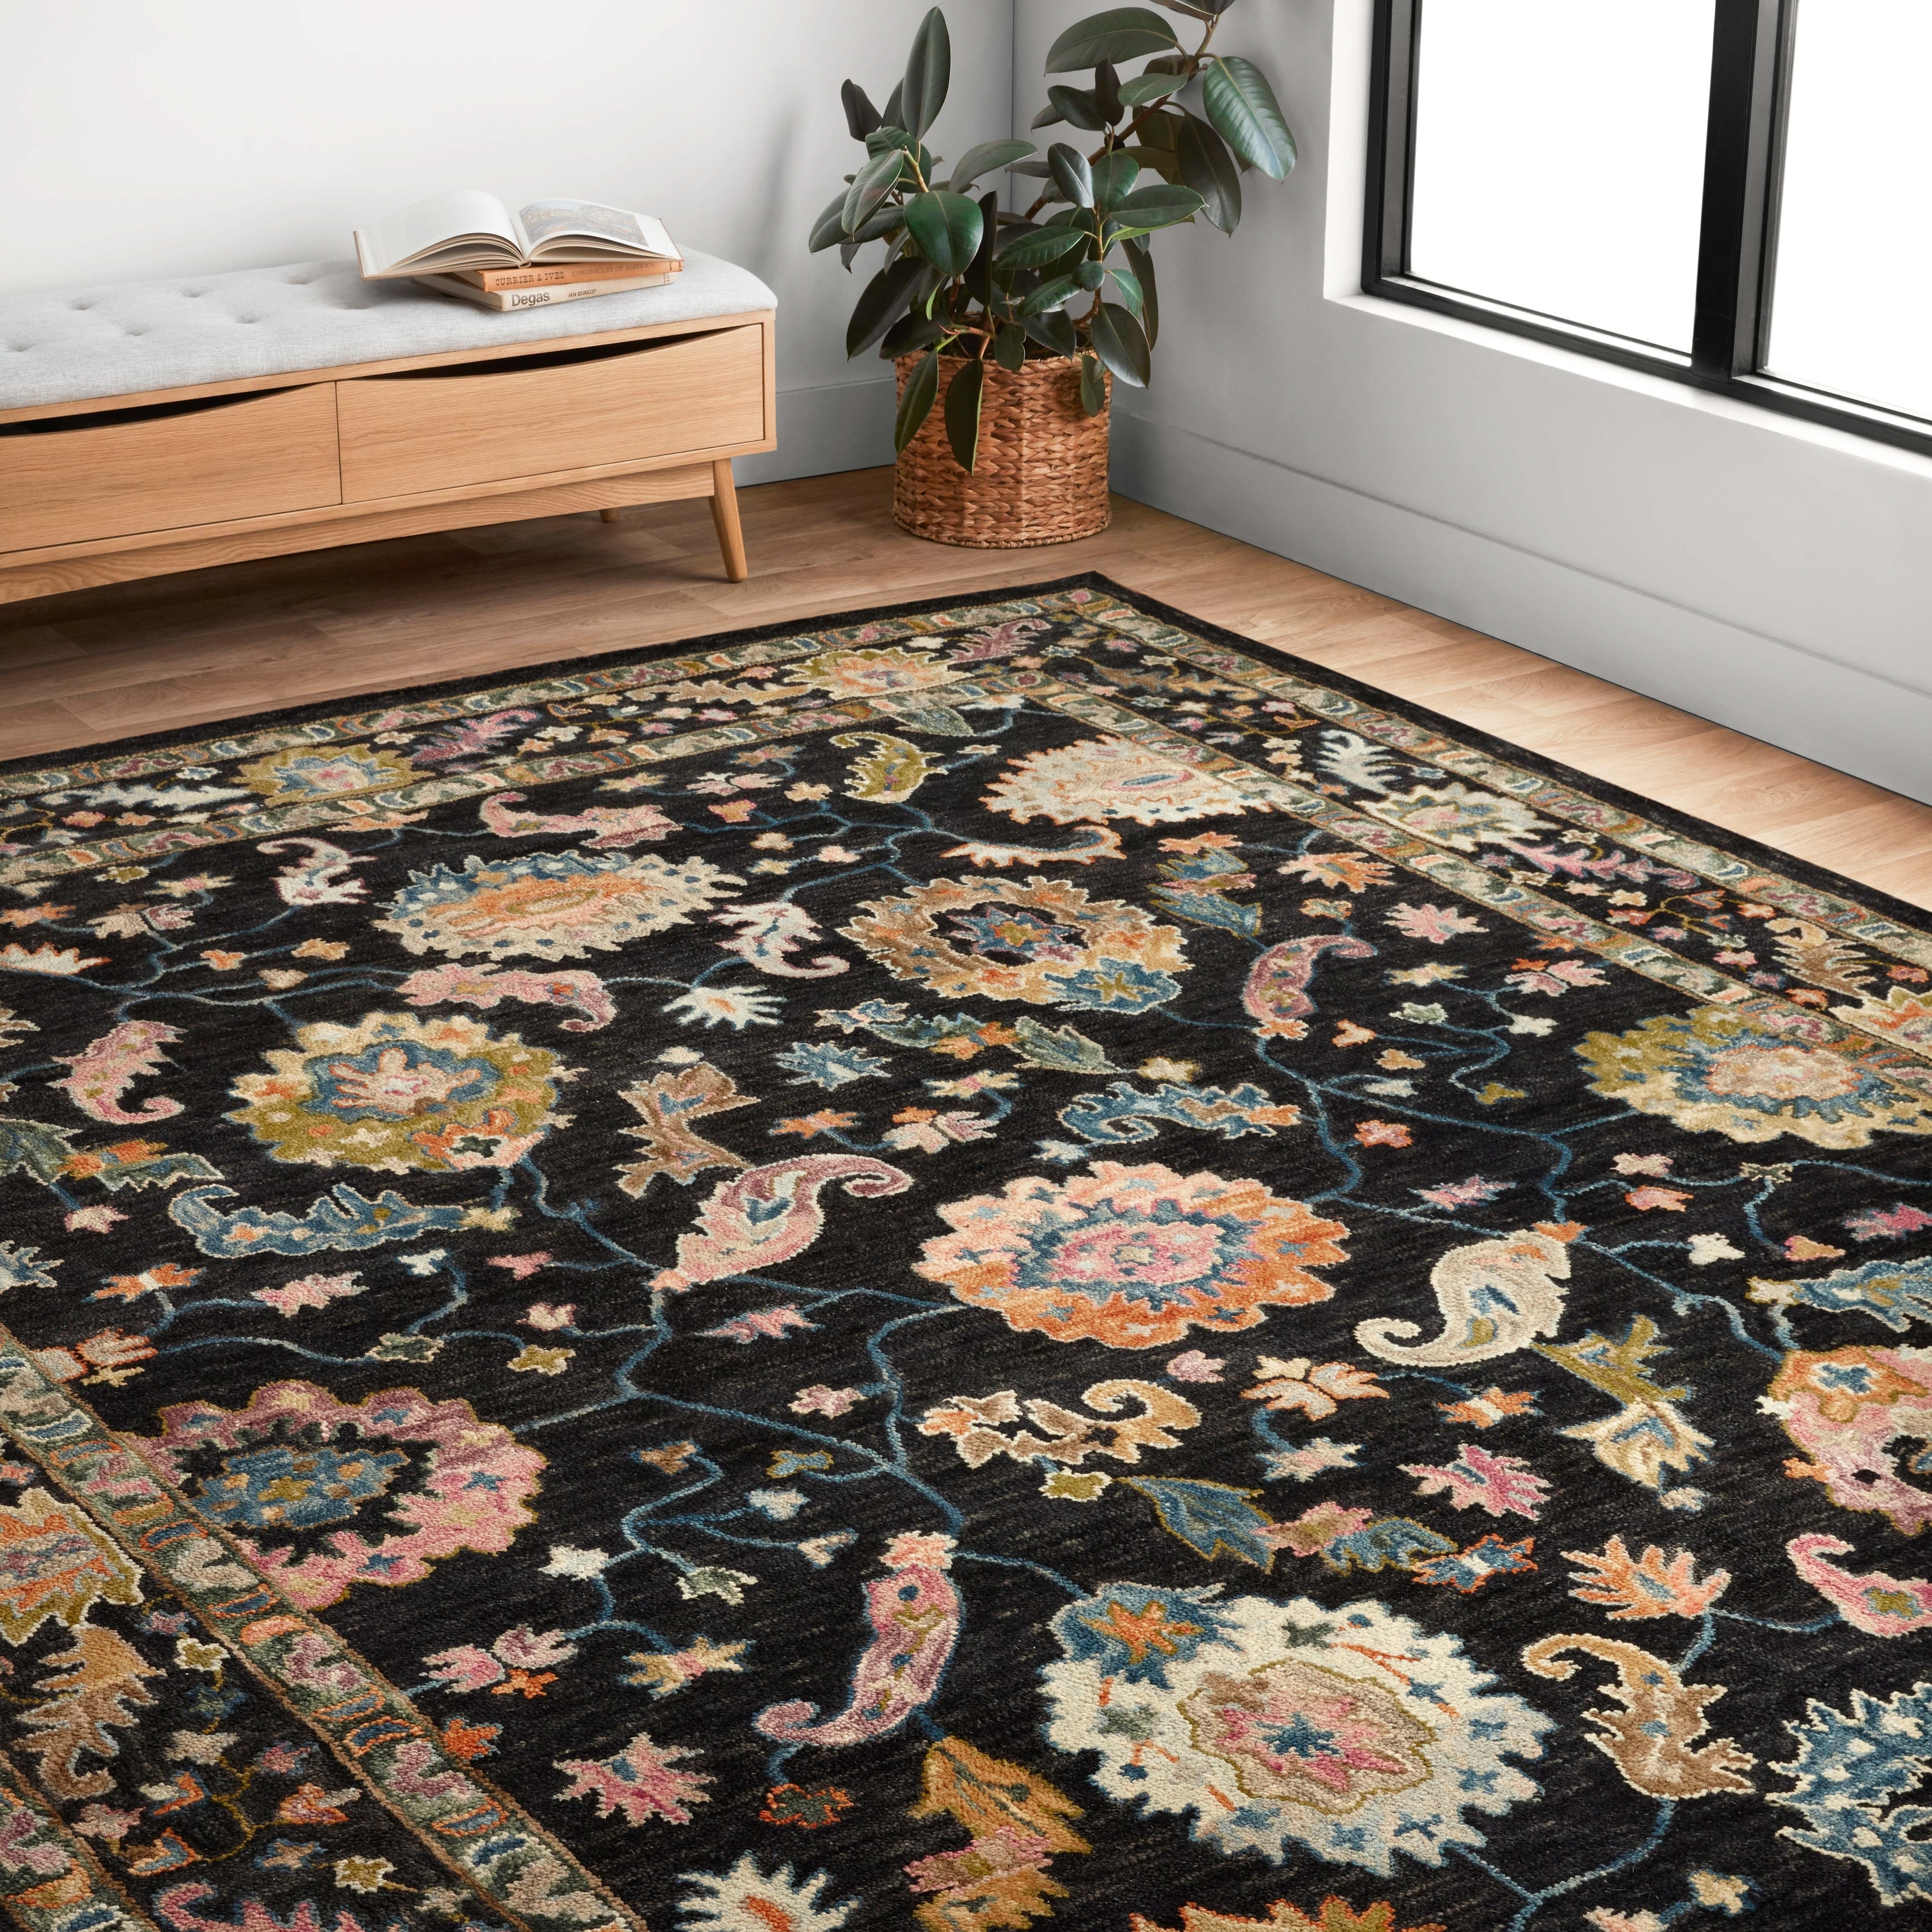 https://ak1.ostkcdn.com/images/products/is/images/direct/dd80ad1f1e815aa1c34c7623623b9950a541cba1/Alexander-Home-Megan-Traditional-Area-Rug.jpg